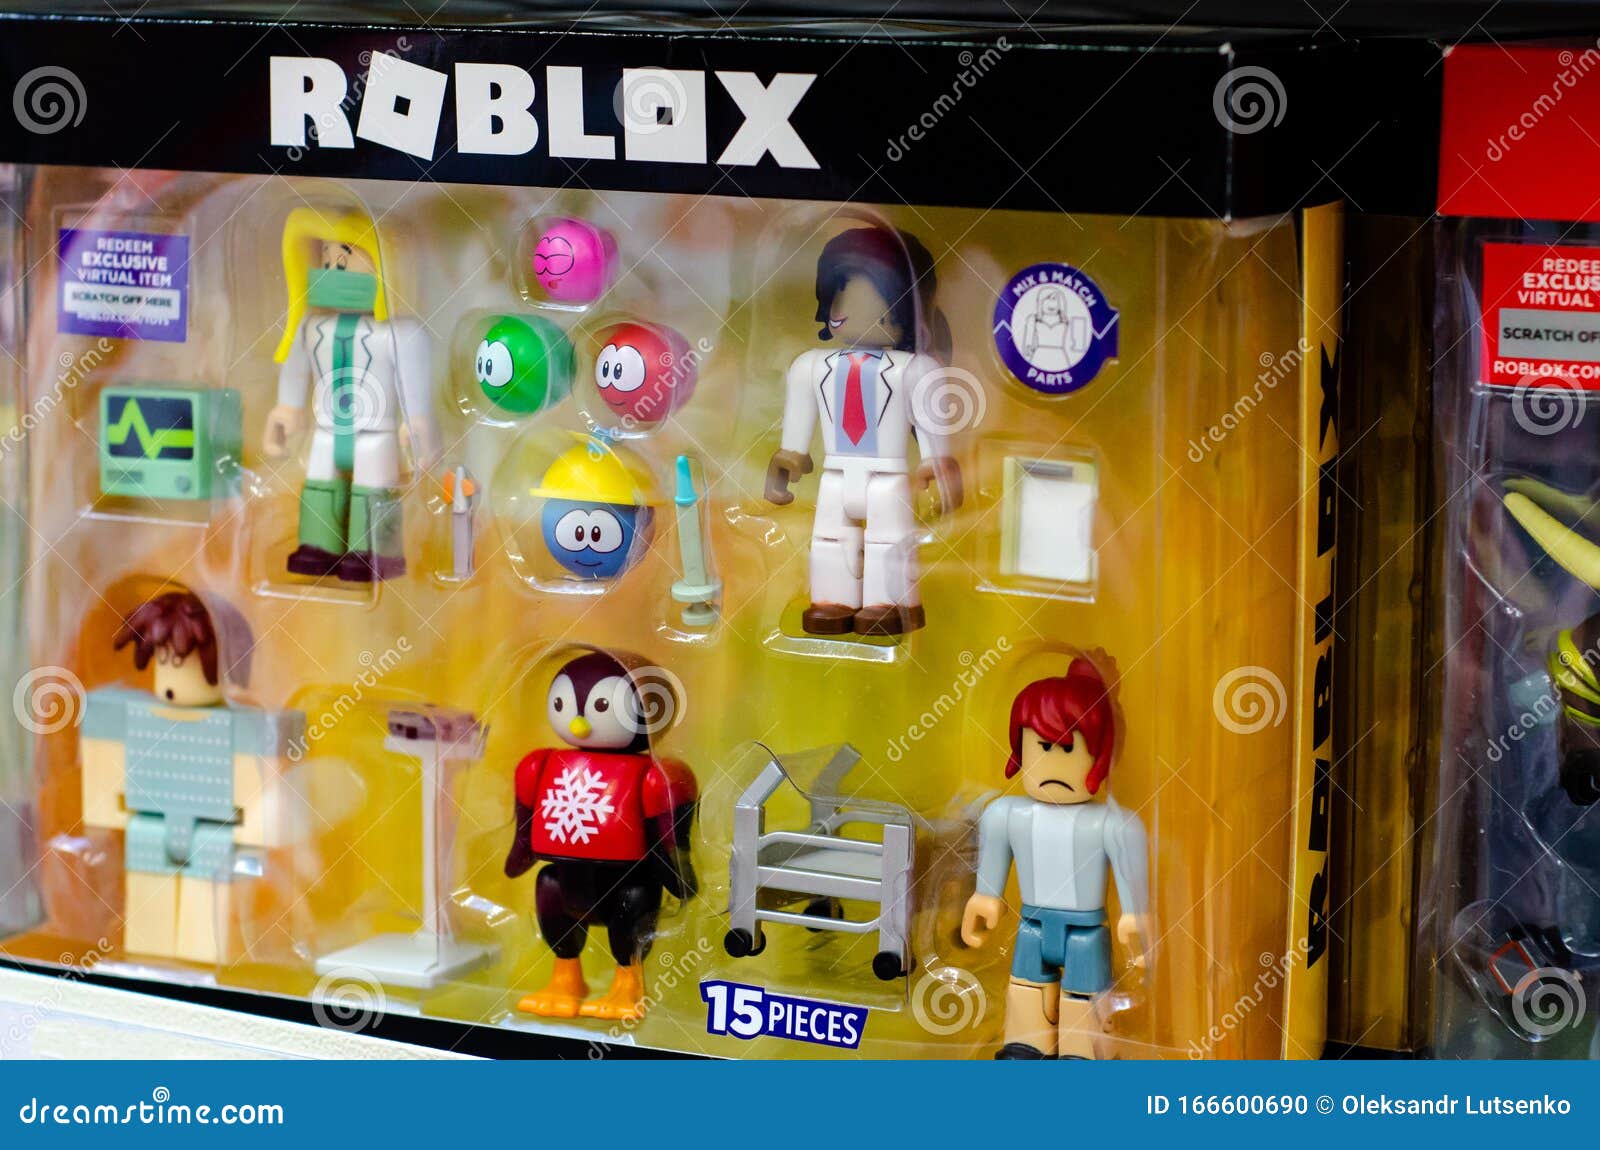 Kyiv Ukraine December 07 2019 Roblox Toys For Sale In The